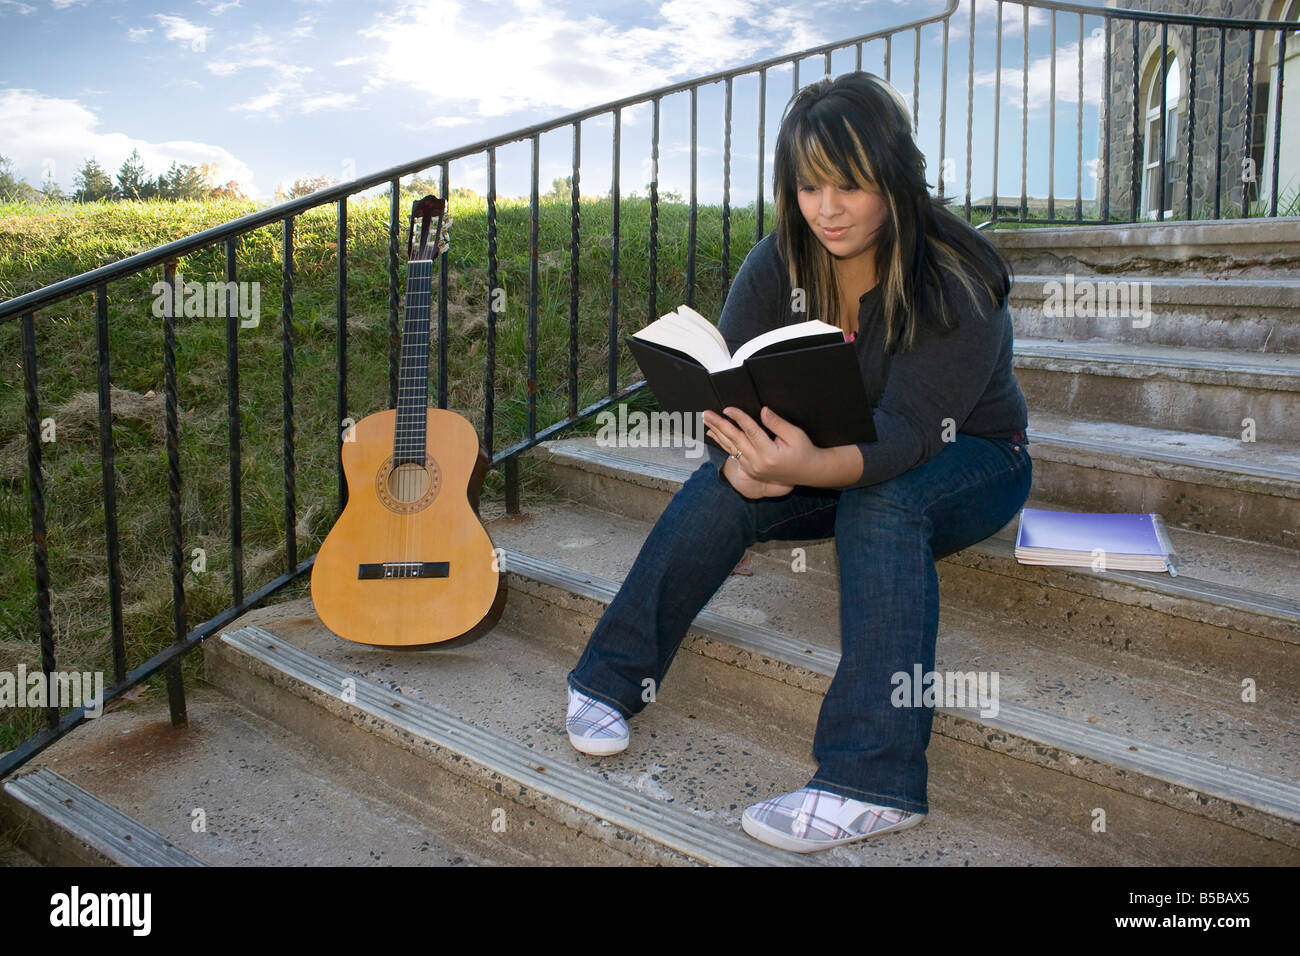 A young woman with highlighted hair reading a book or doing homework on campus Stock Photo